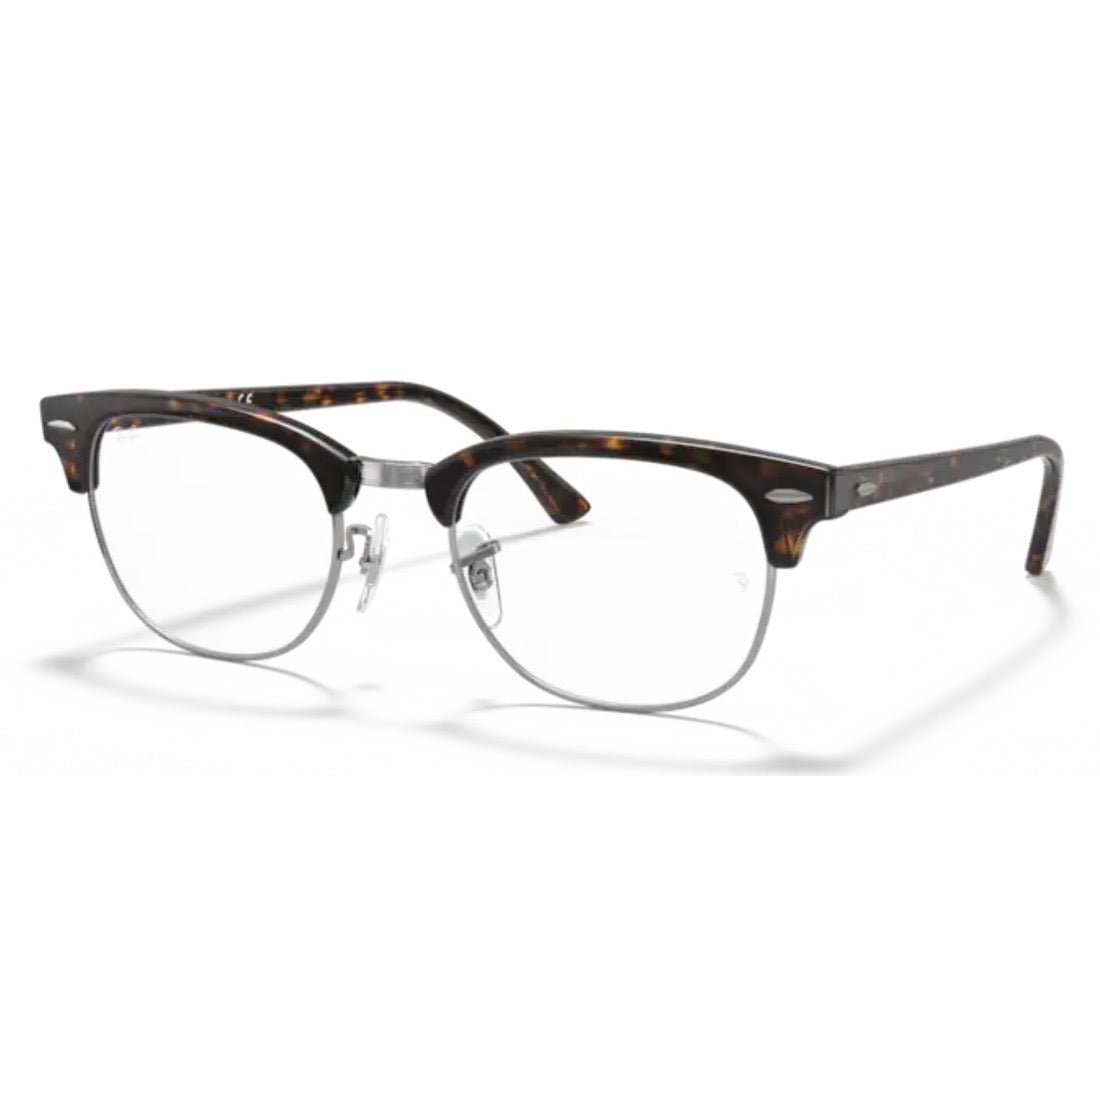 RAY-BAN - RX5154 2012 - Clubmaster - PARIS LUNETIER